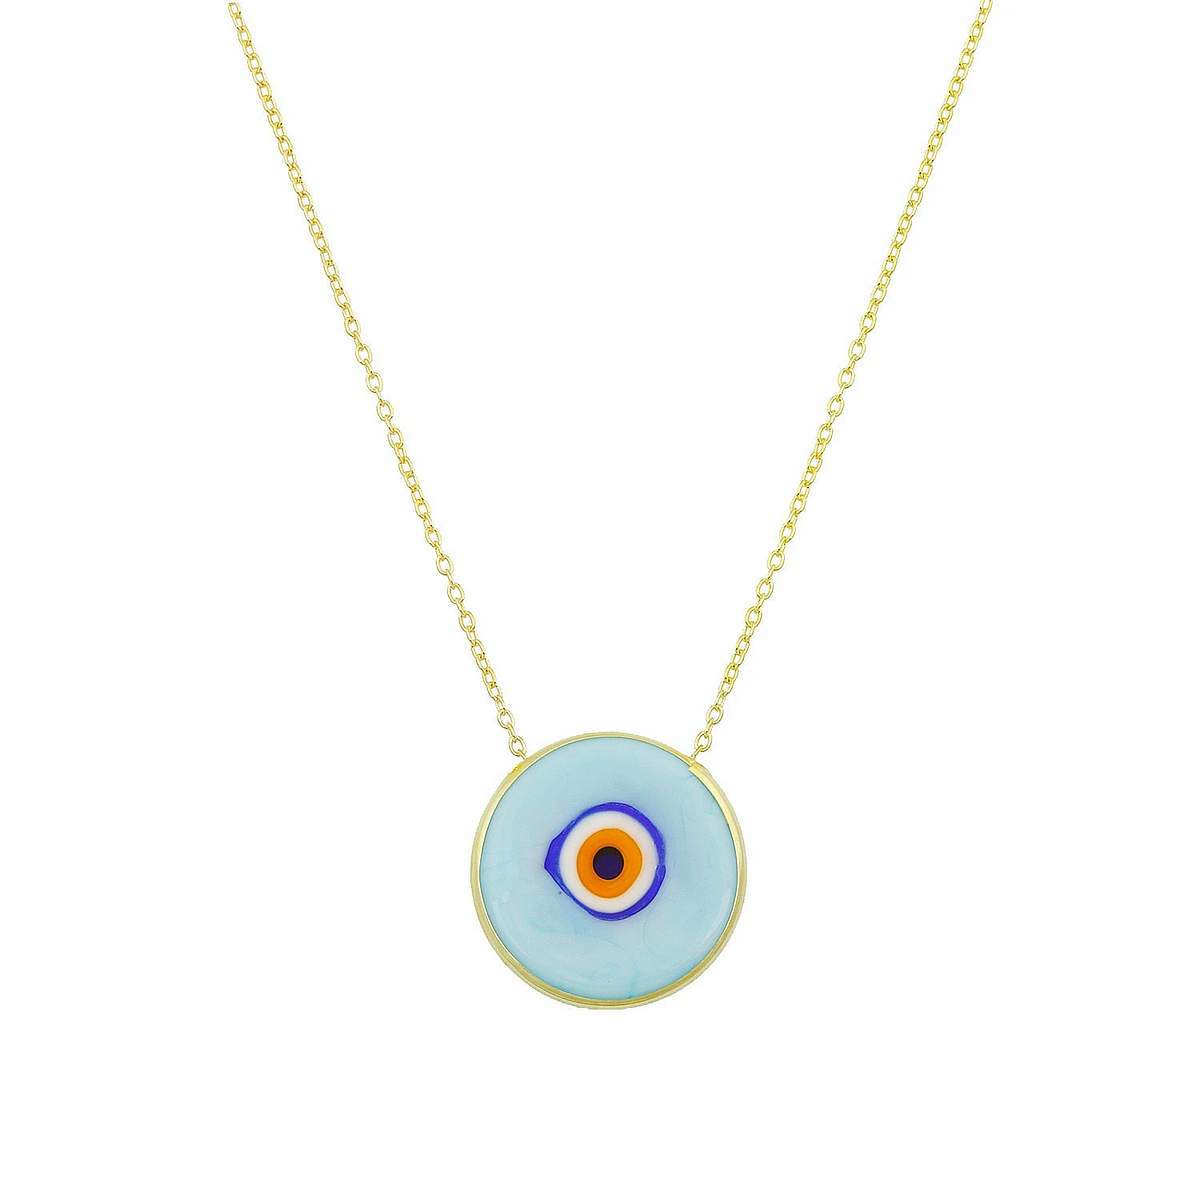 Antique Evil Eye Necklace in Baby Blue